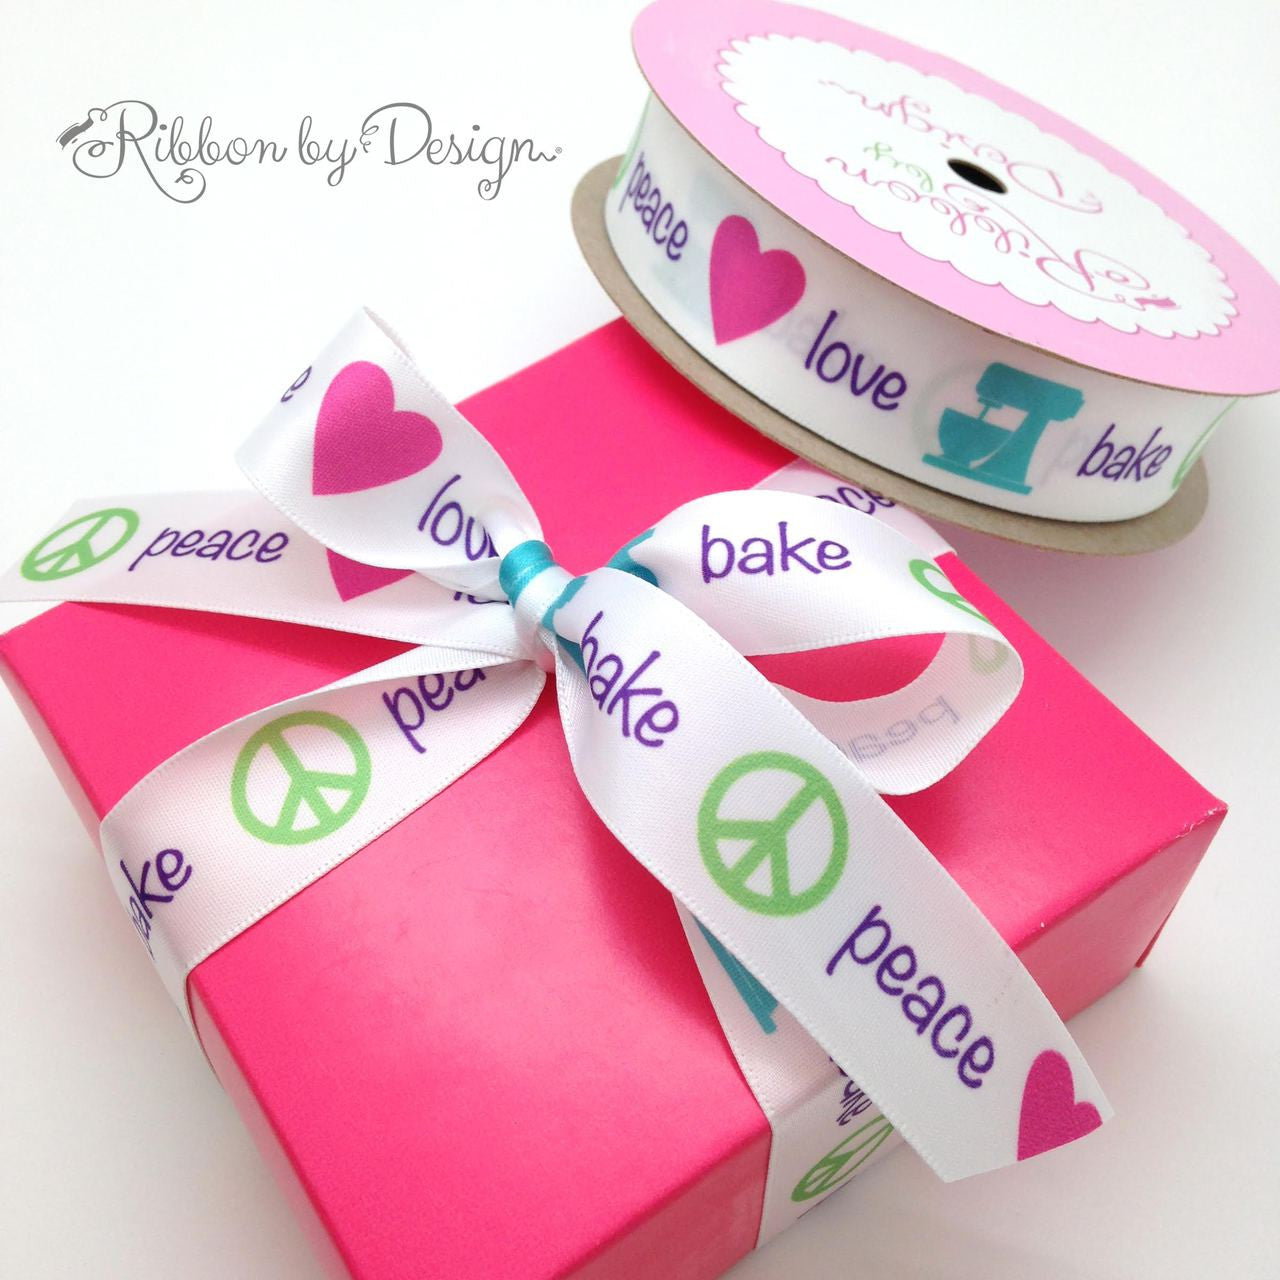 Add this lovely ribbon to a box of sweetness and the recipient will love it!